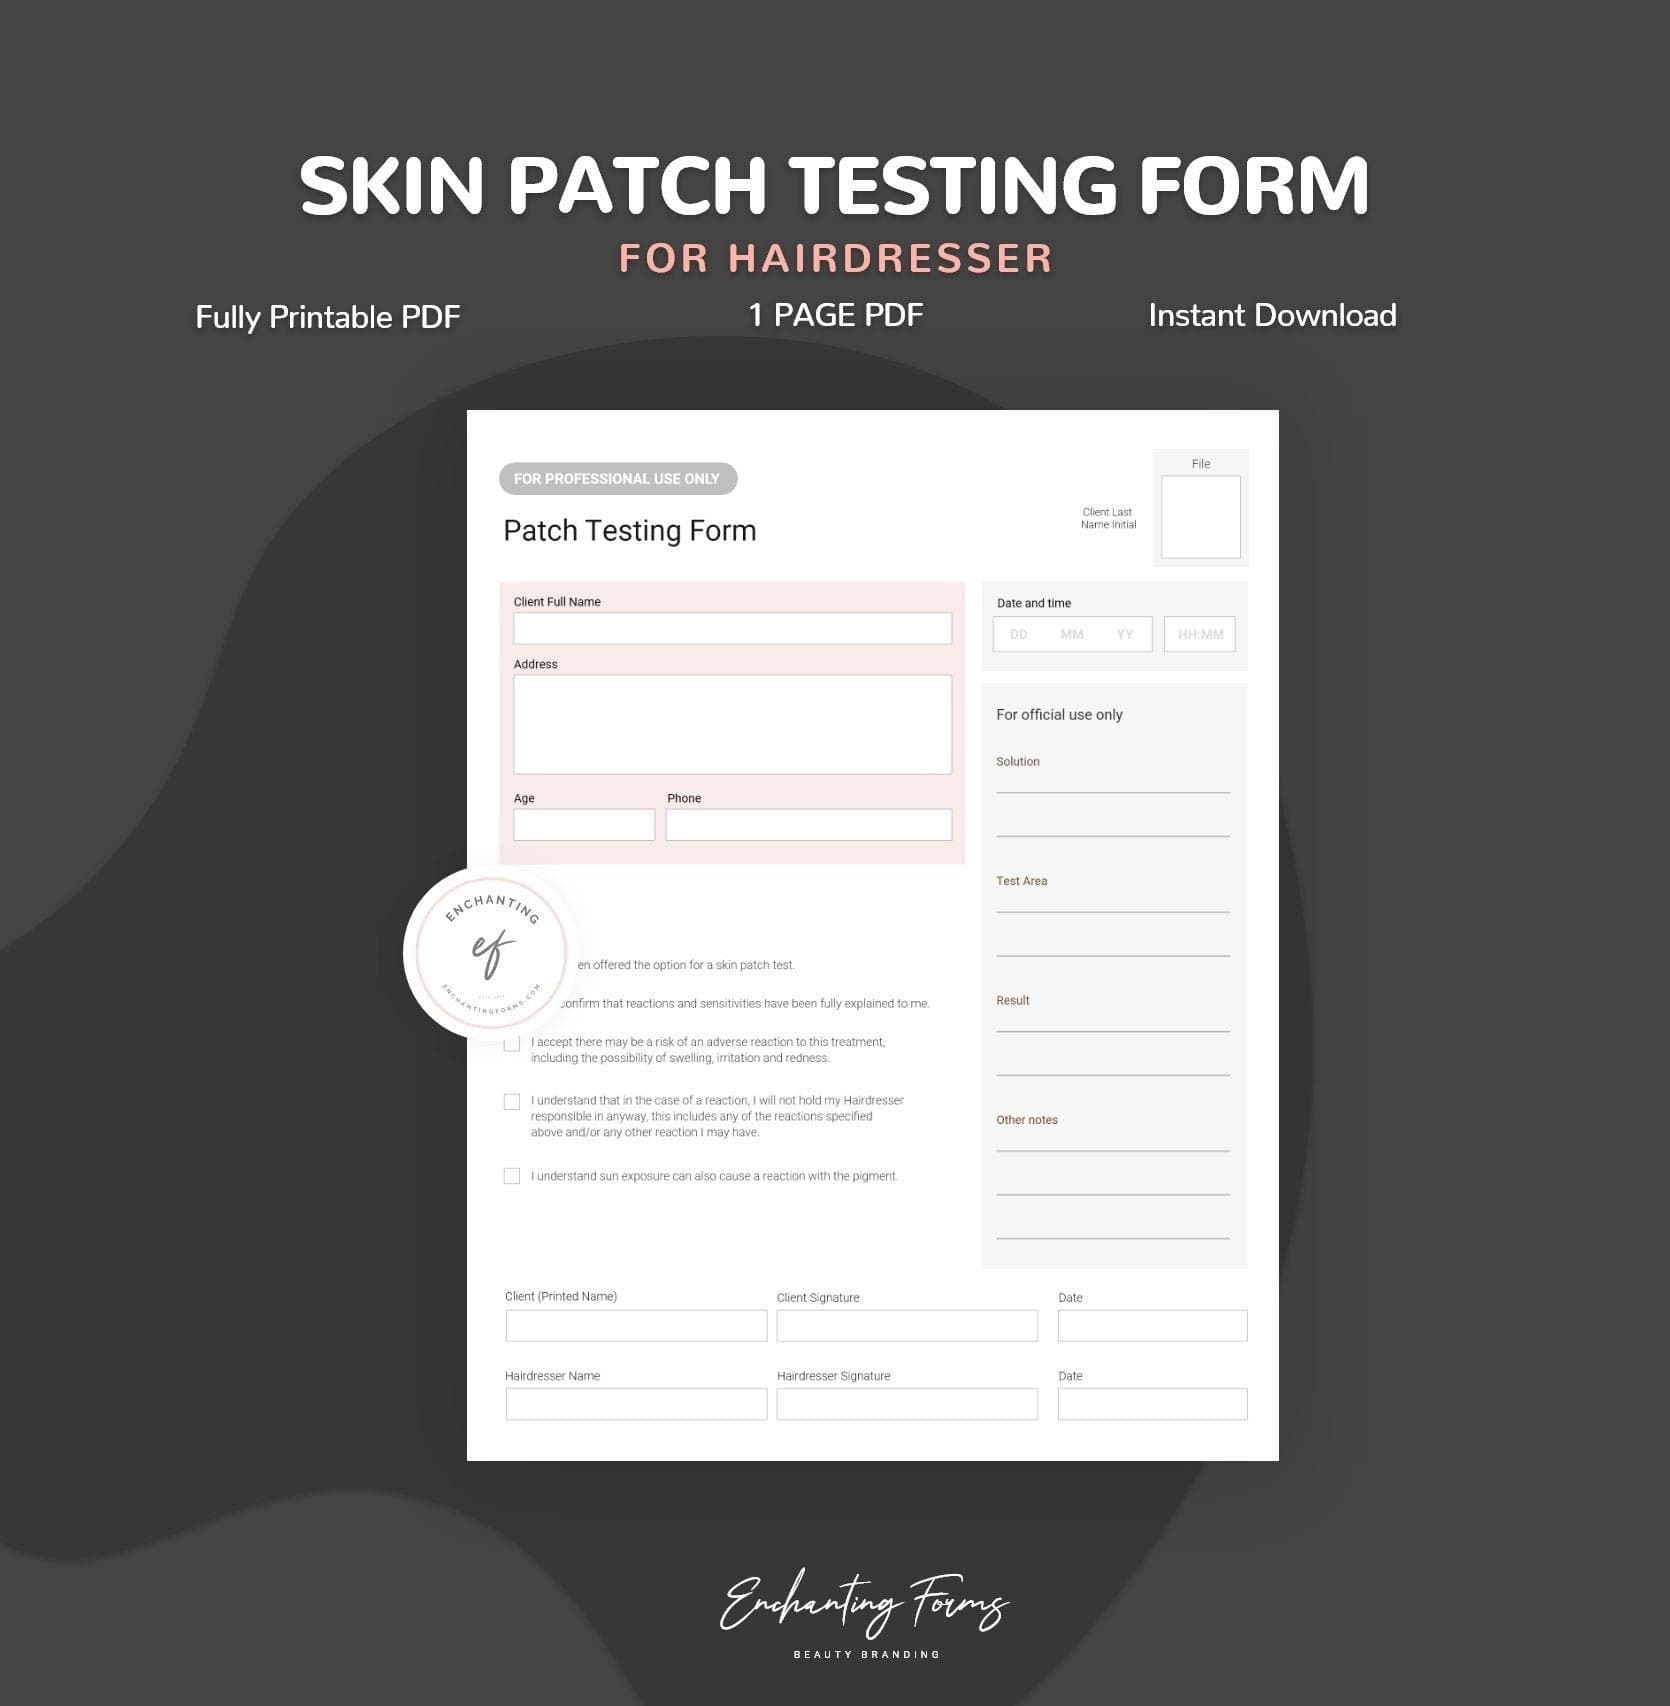 Patch Testing Form for Hairdressers